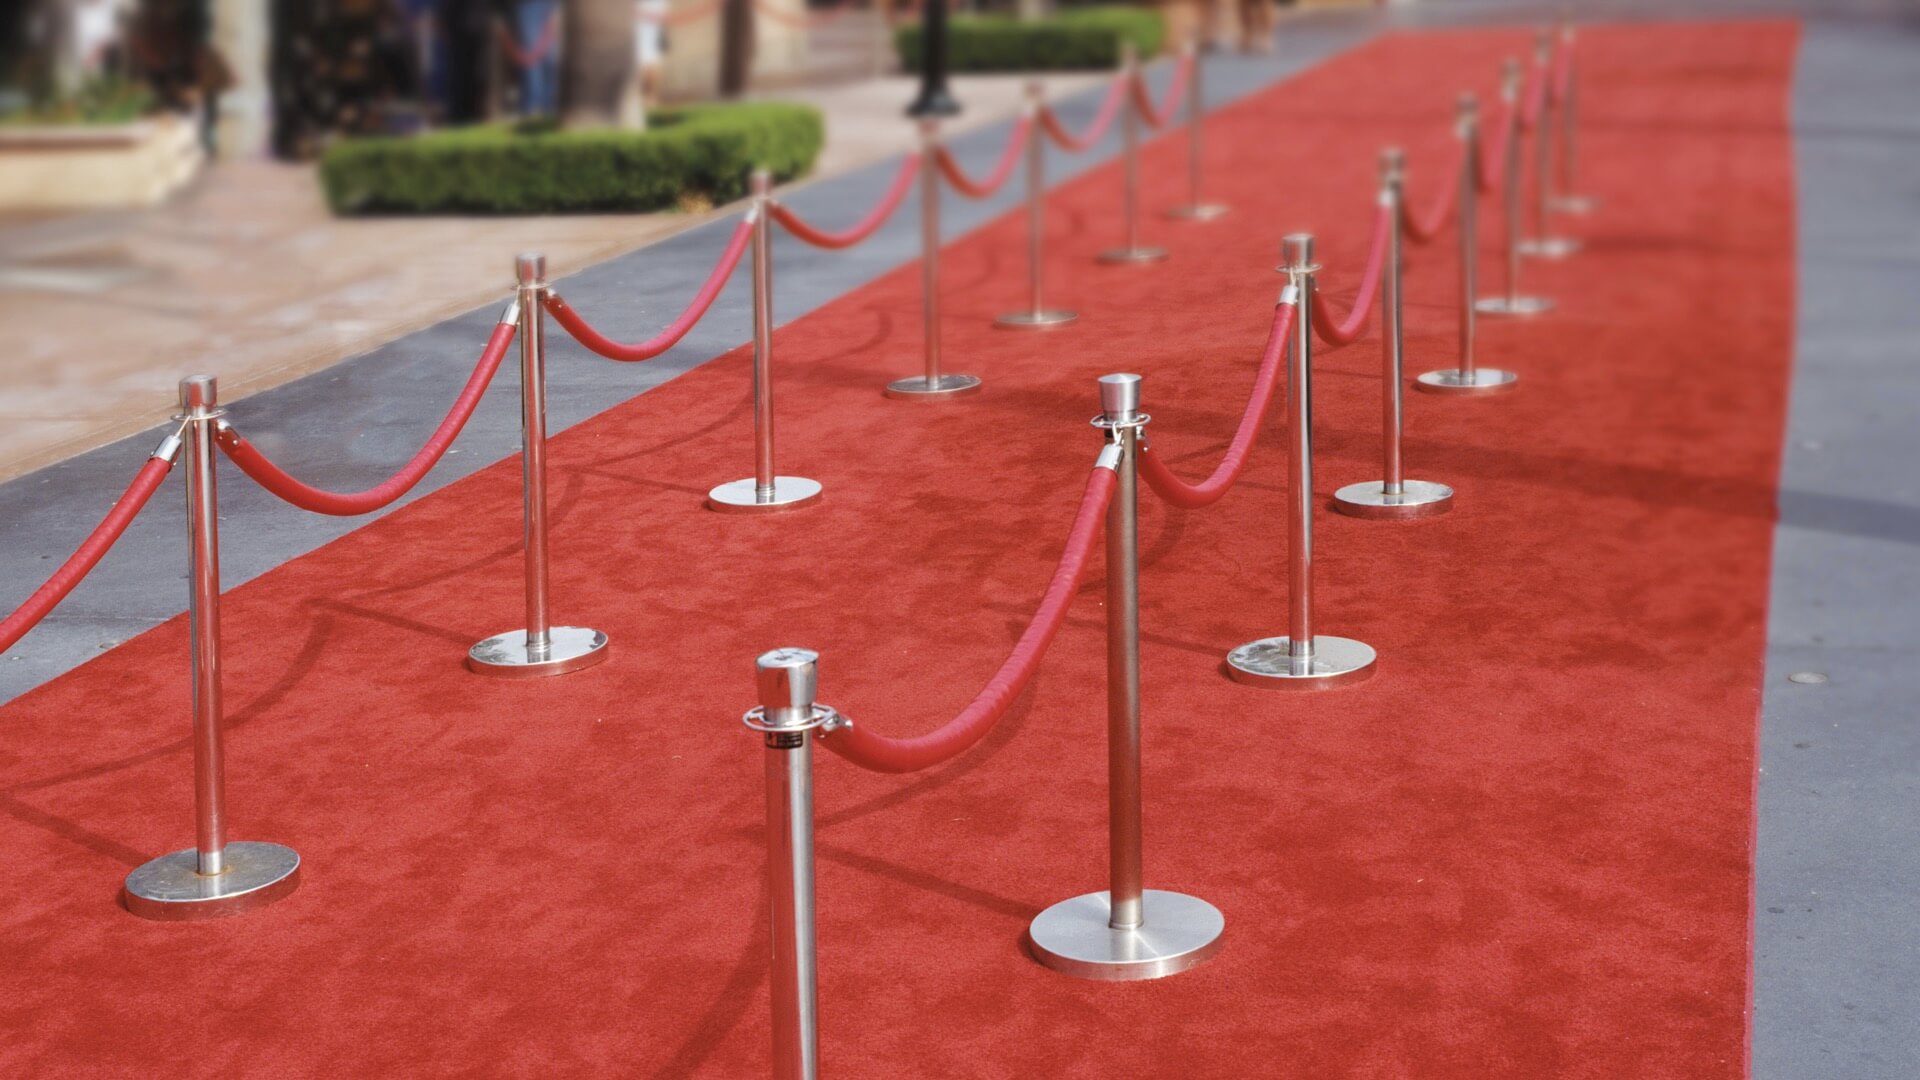 Entertainment,TraditionalPosts,Rope/Chain,Queuing,Barriers